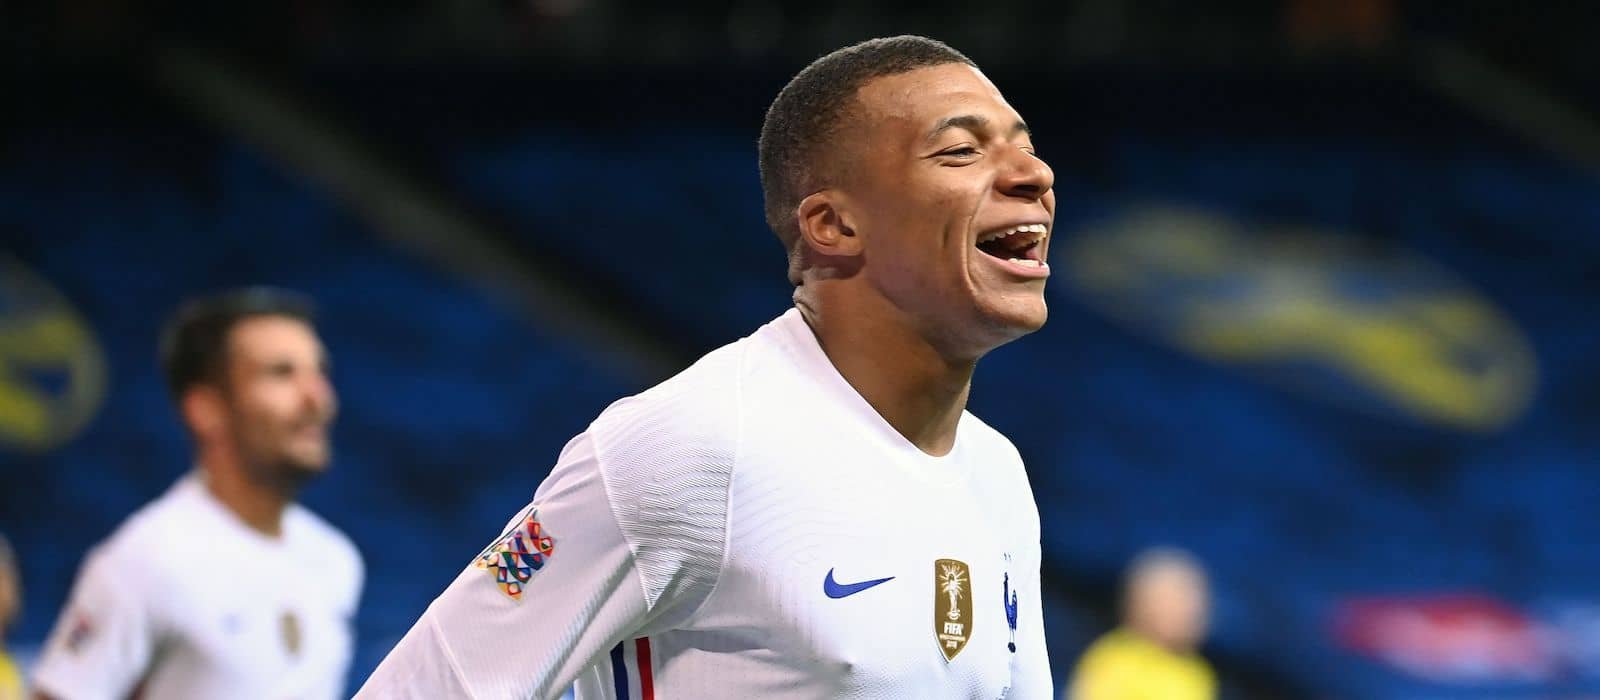 Sir Jim Ratcliffe wants to bring Kylian Mbappe to Manchester United – Man United News And Transfer News